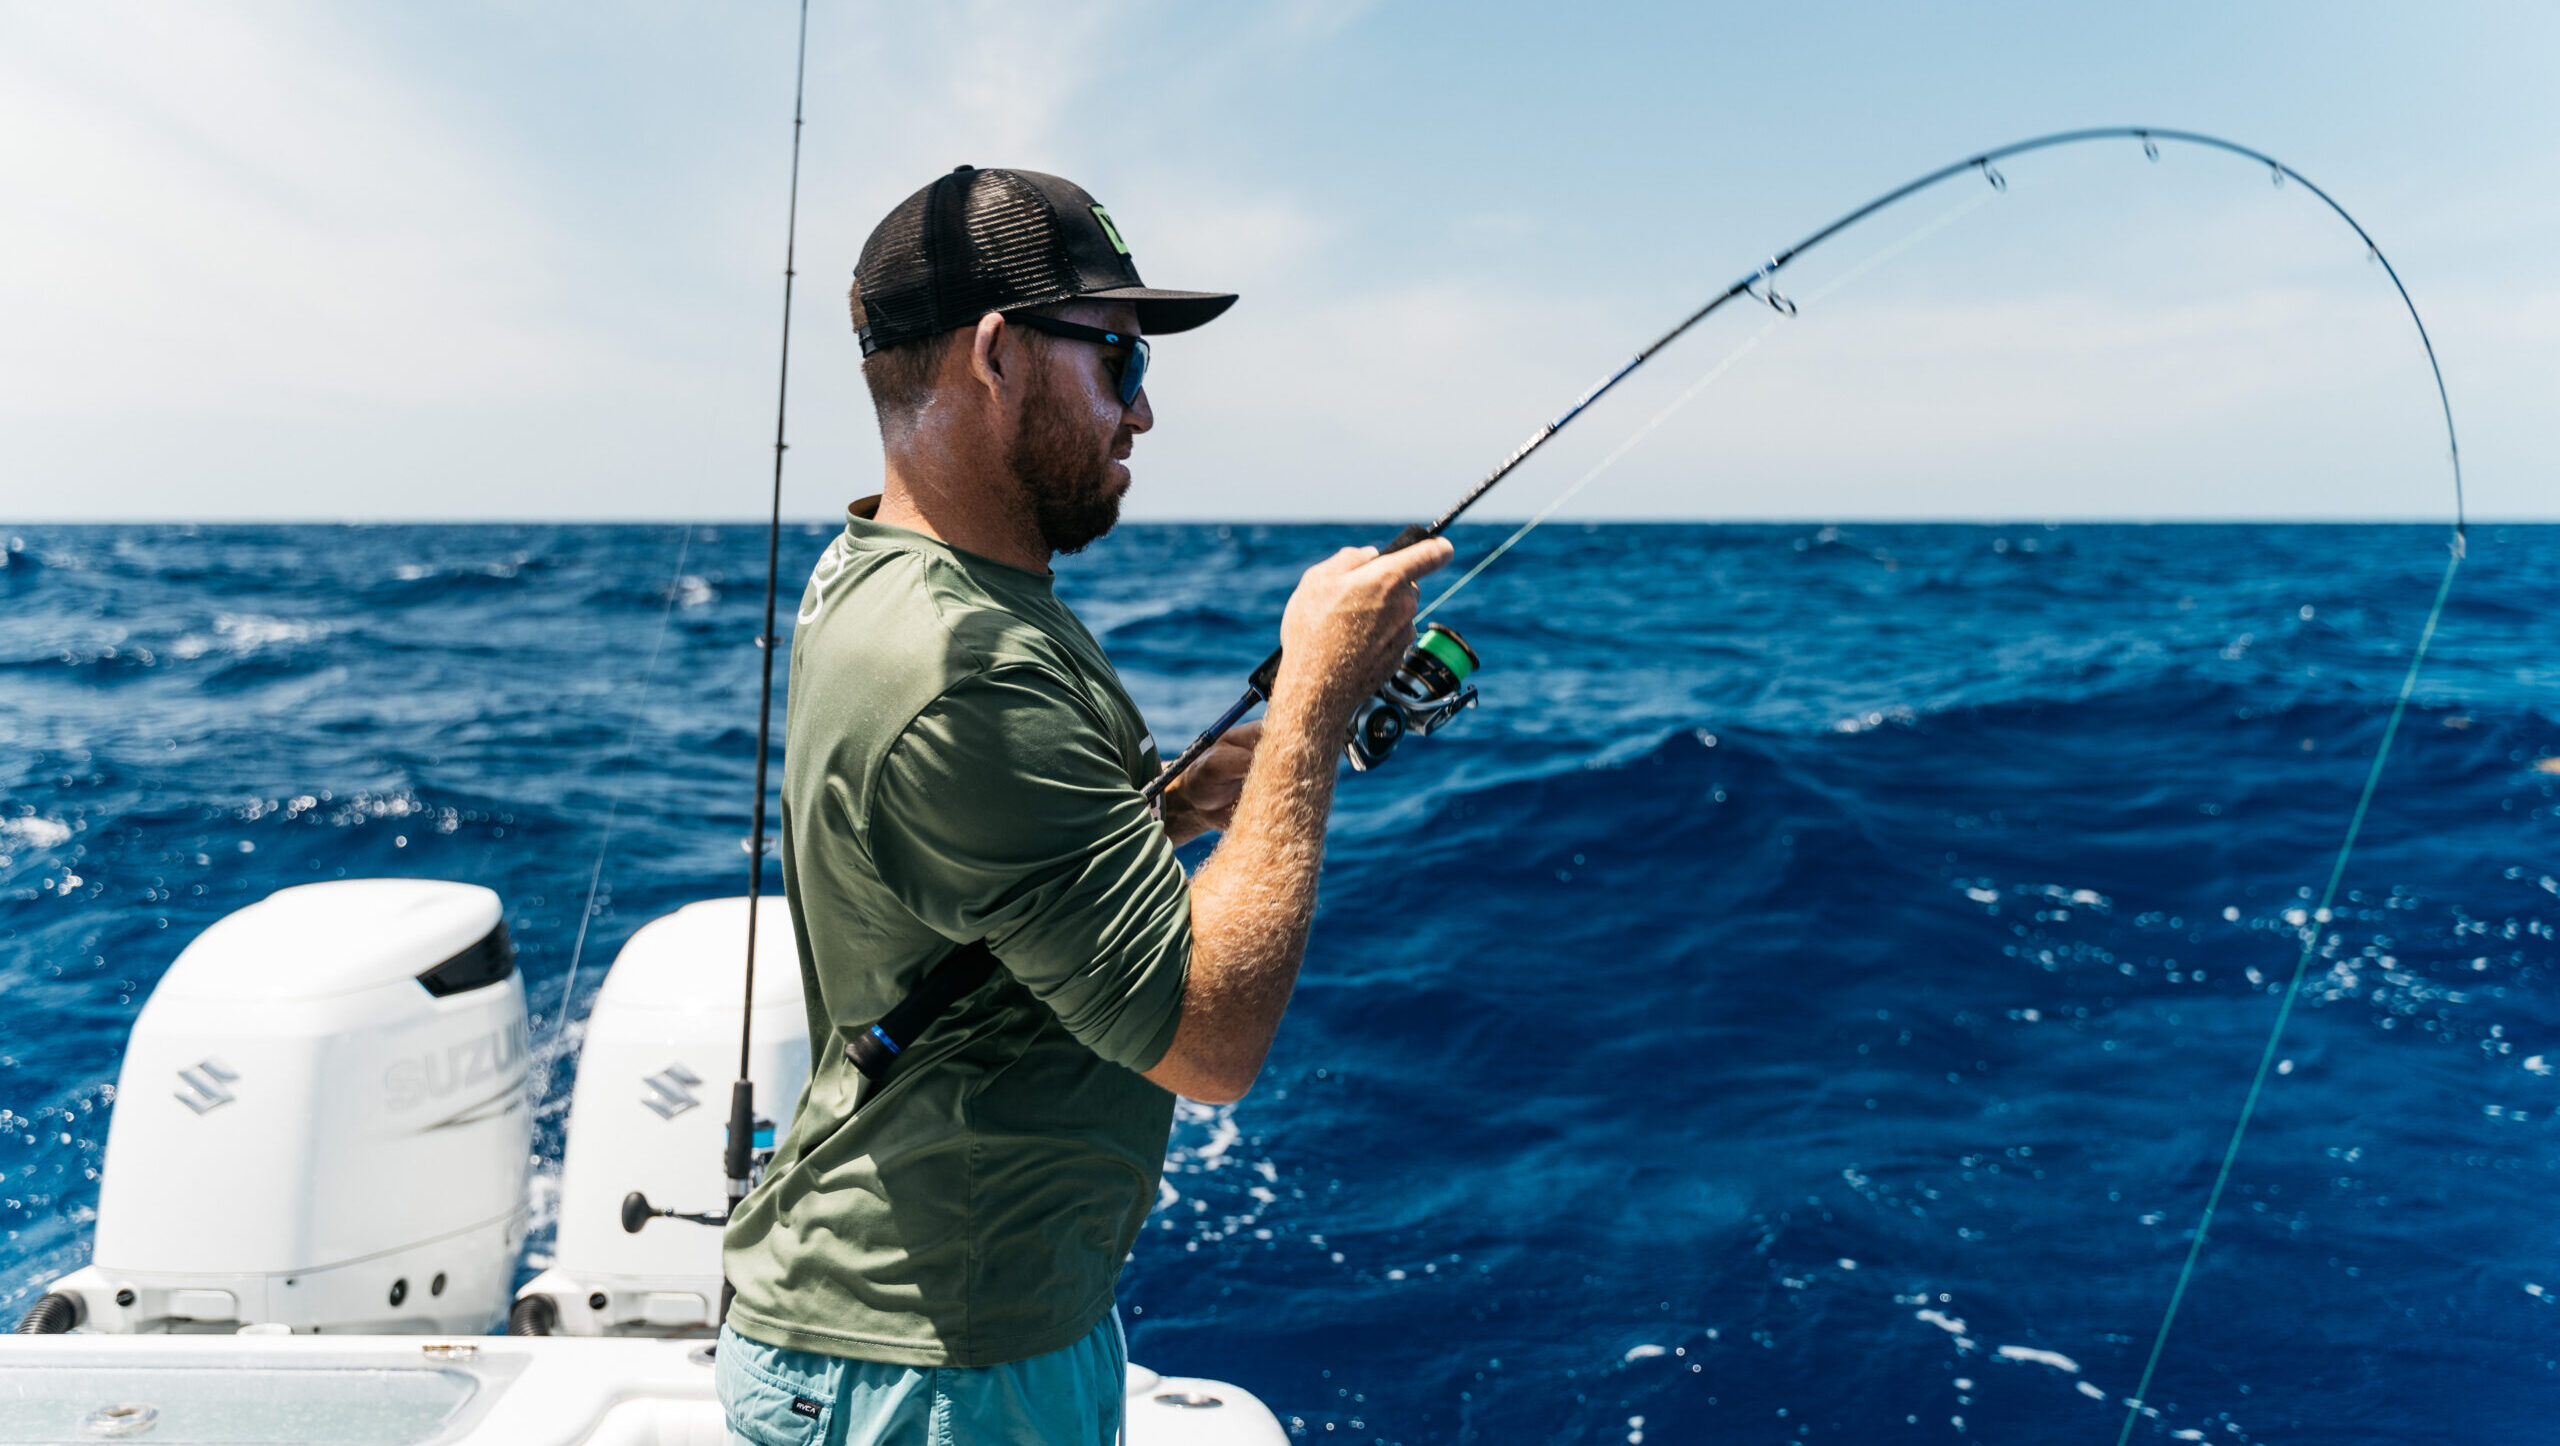 Customer joyfully reeling in a fish surrounded by fishing equipment while on a charter, with a stunning ocean backdrop and the sun shining in the background.